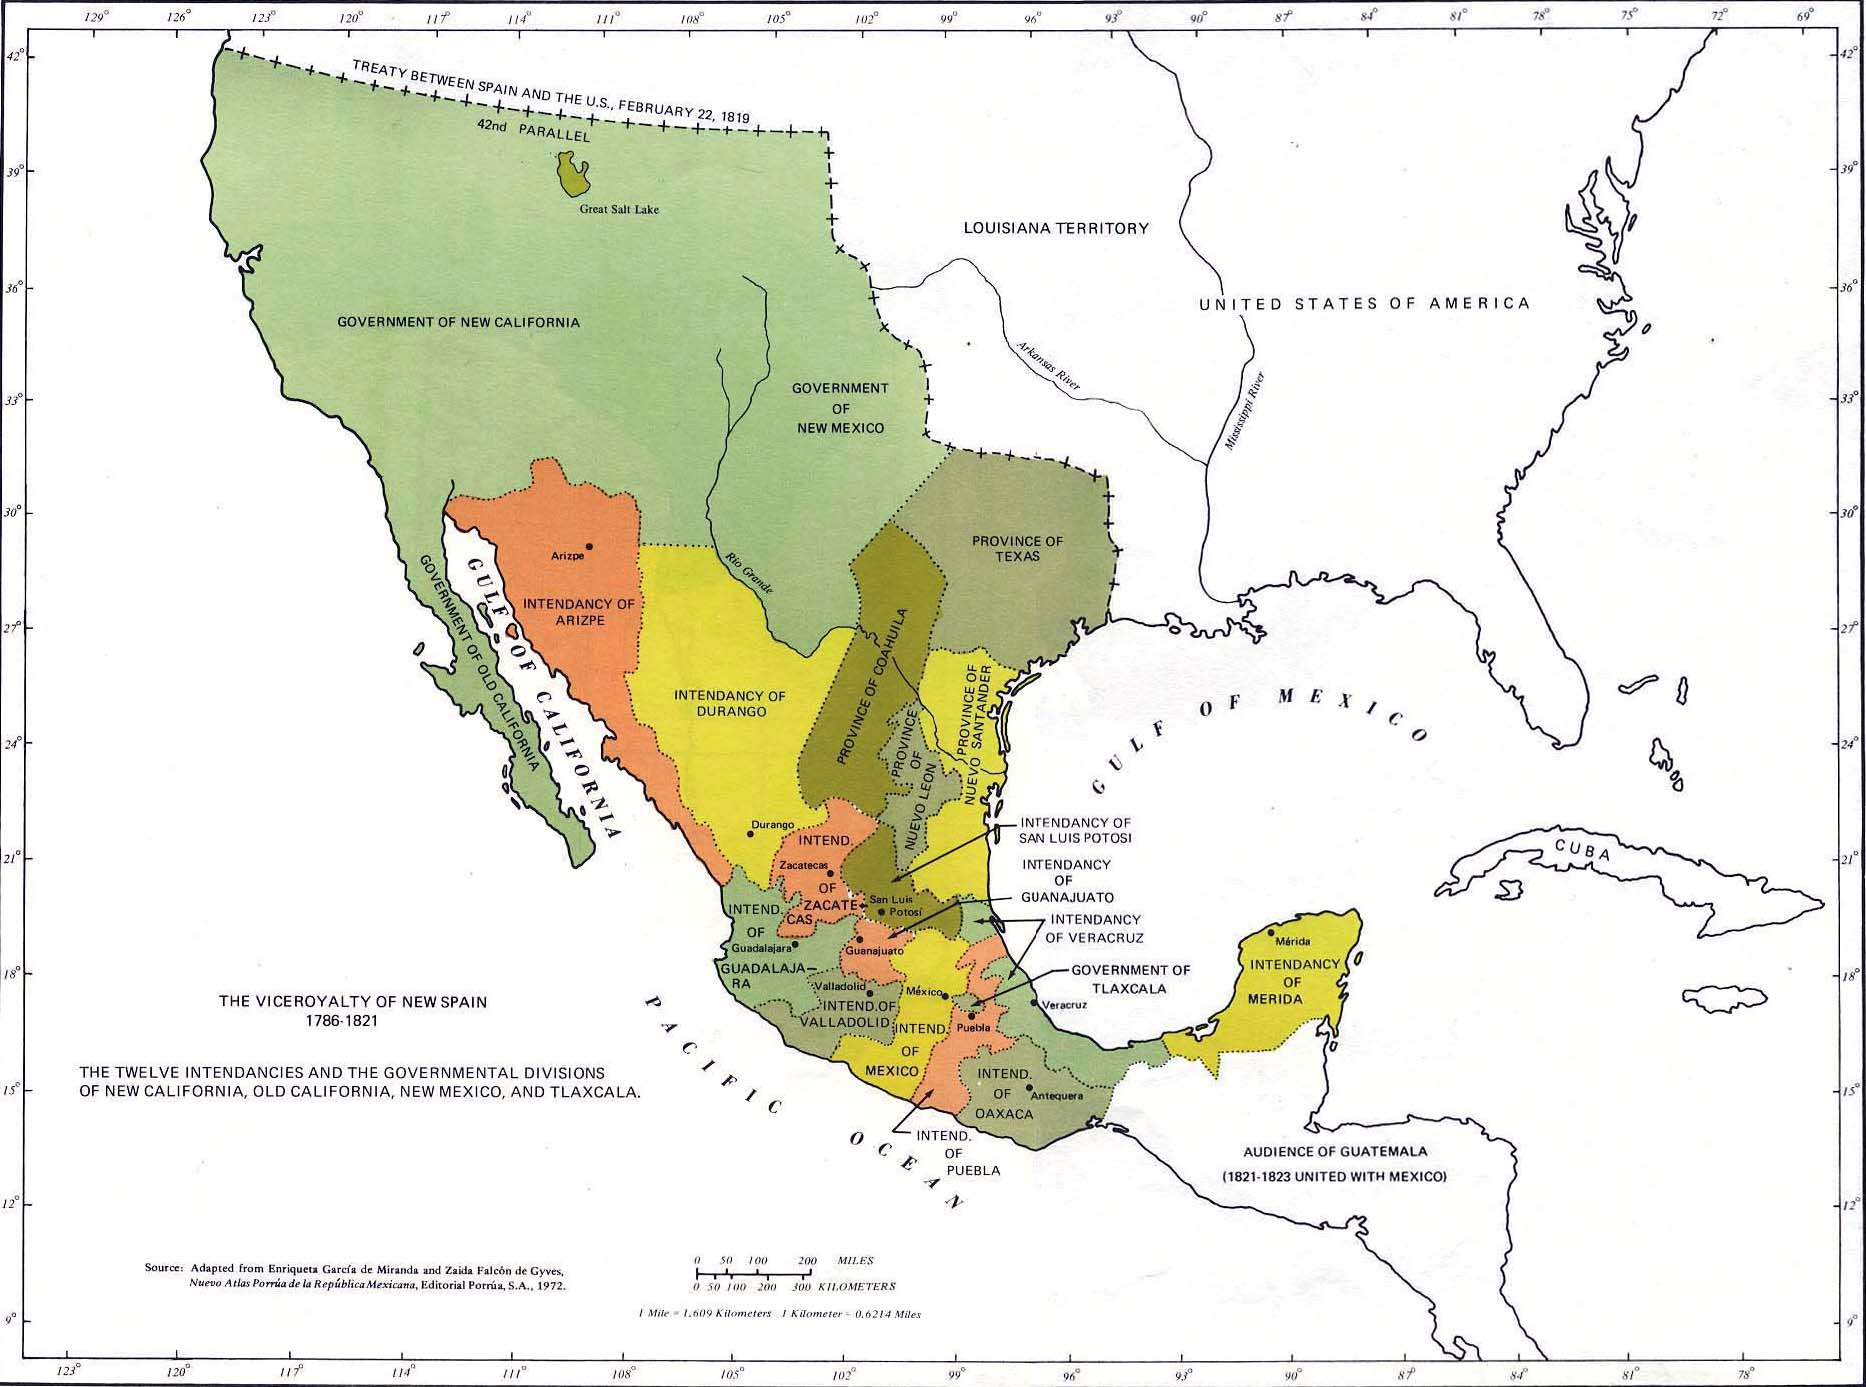 Viceroyalty of New Spain 1786